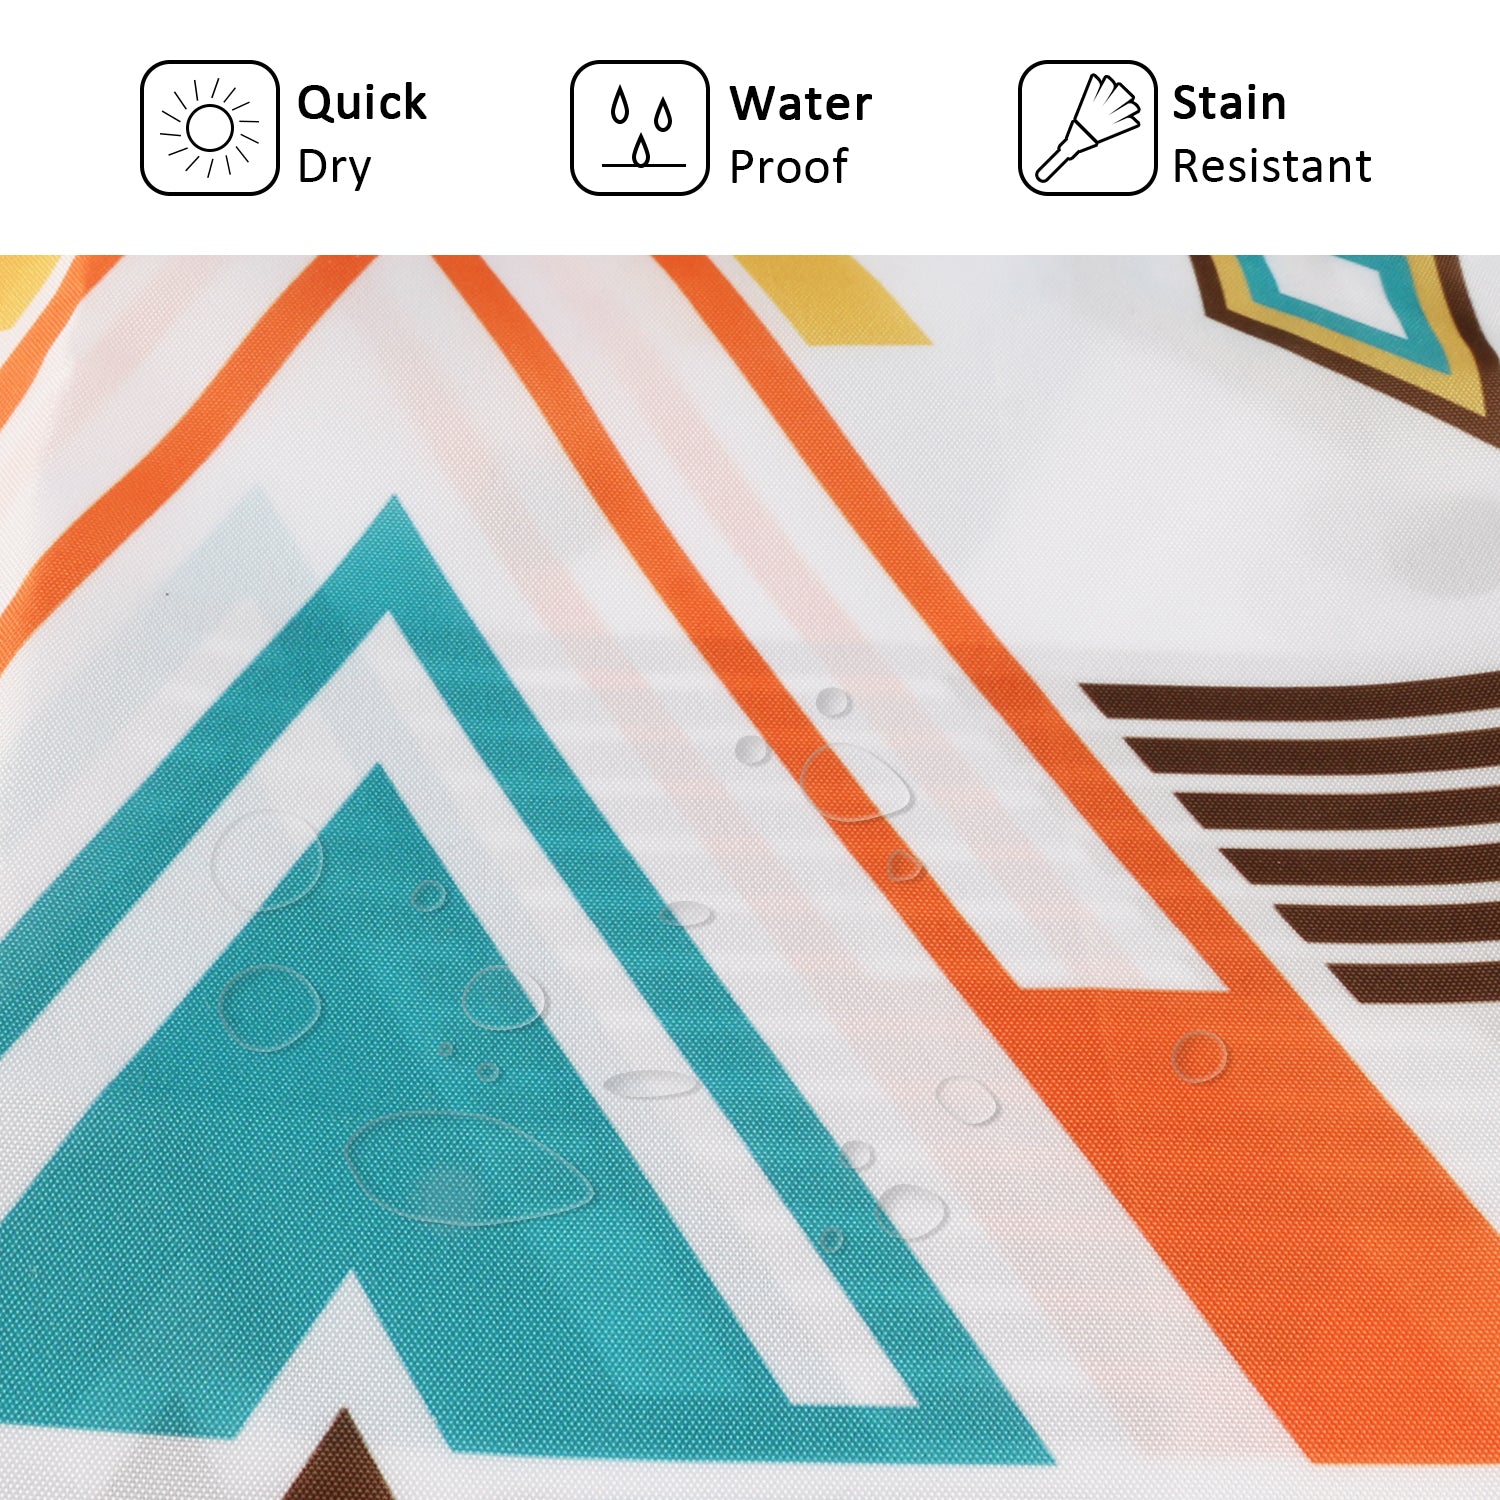 Western Abstract Aztec Shower Curtain Teal Geometric Tribal Arrow Southwest